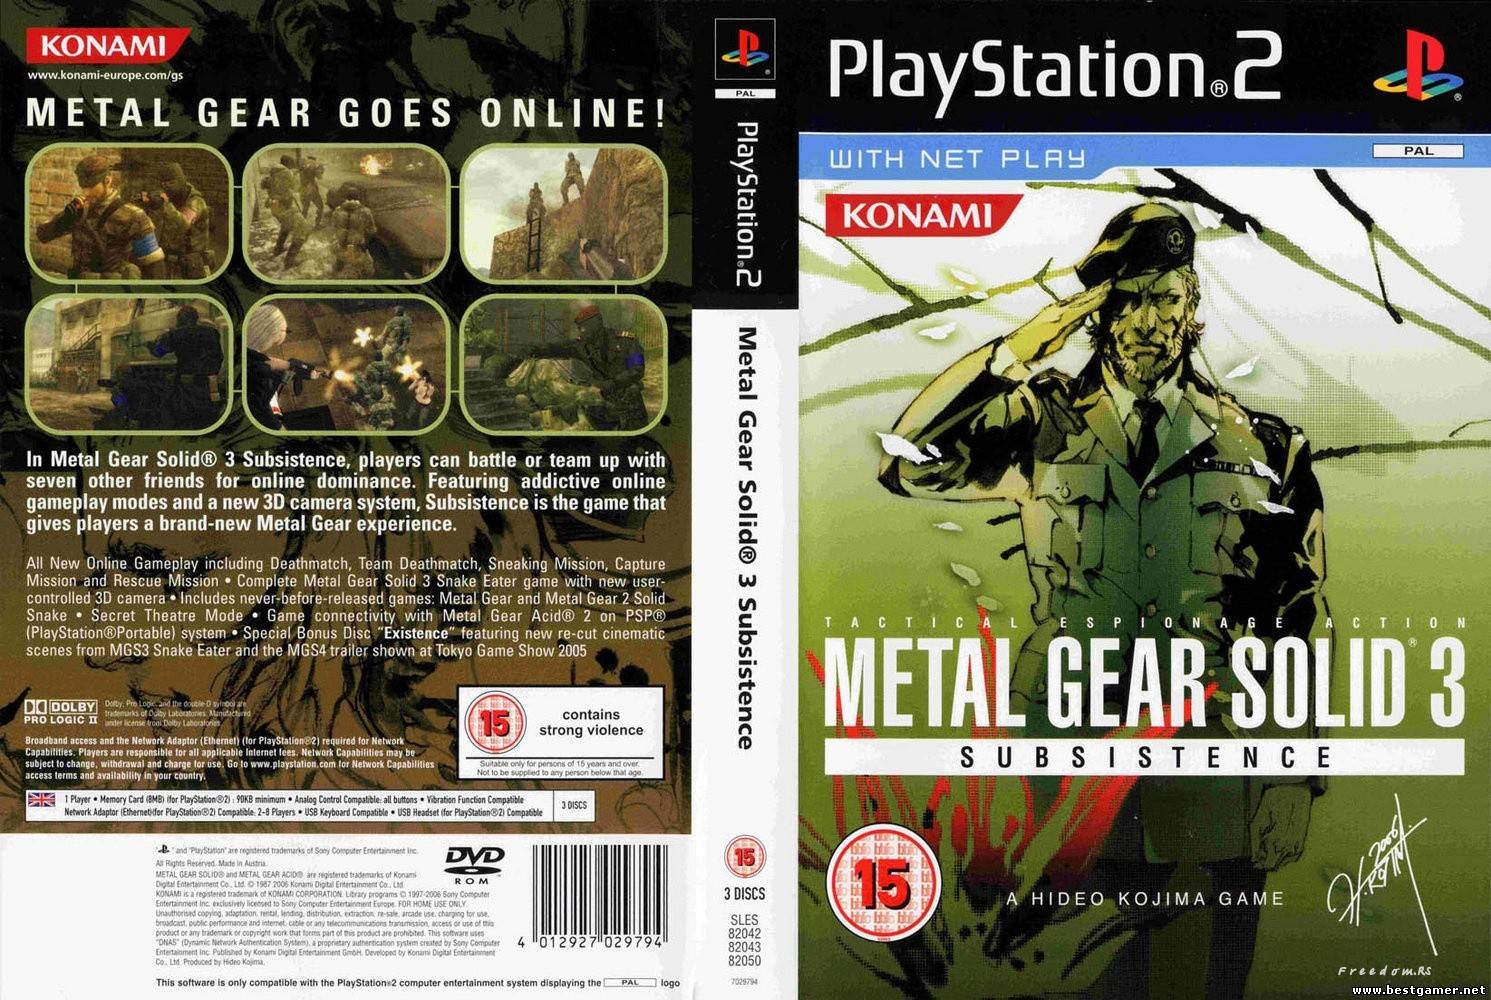 [PS2] Metal Gear Solid 3: Limited Edition 3 DVD (,PERSISTENCE,EXISTENCE) [ENG]